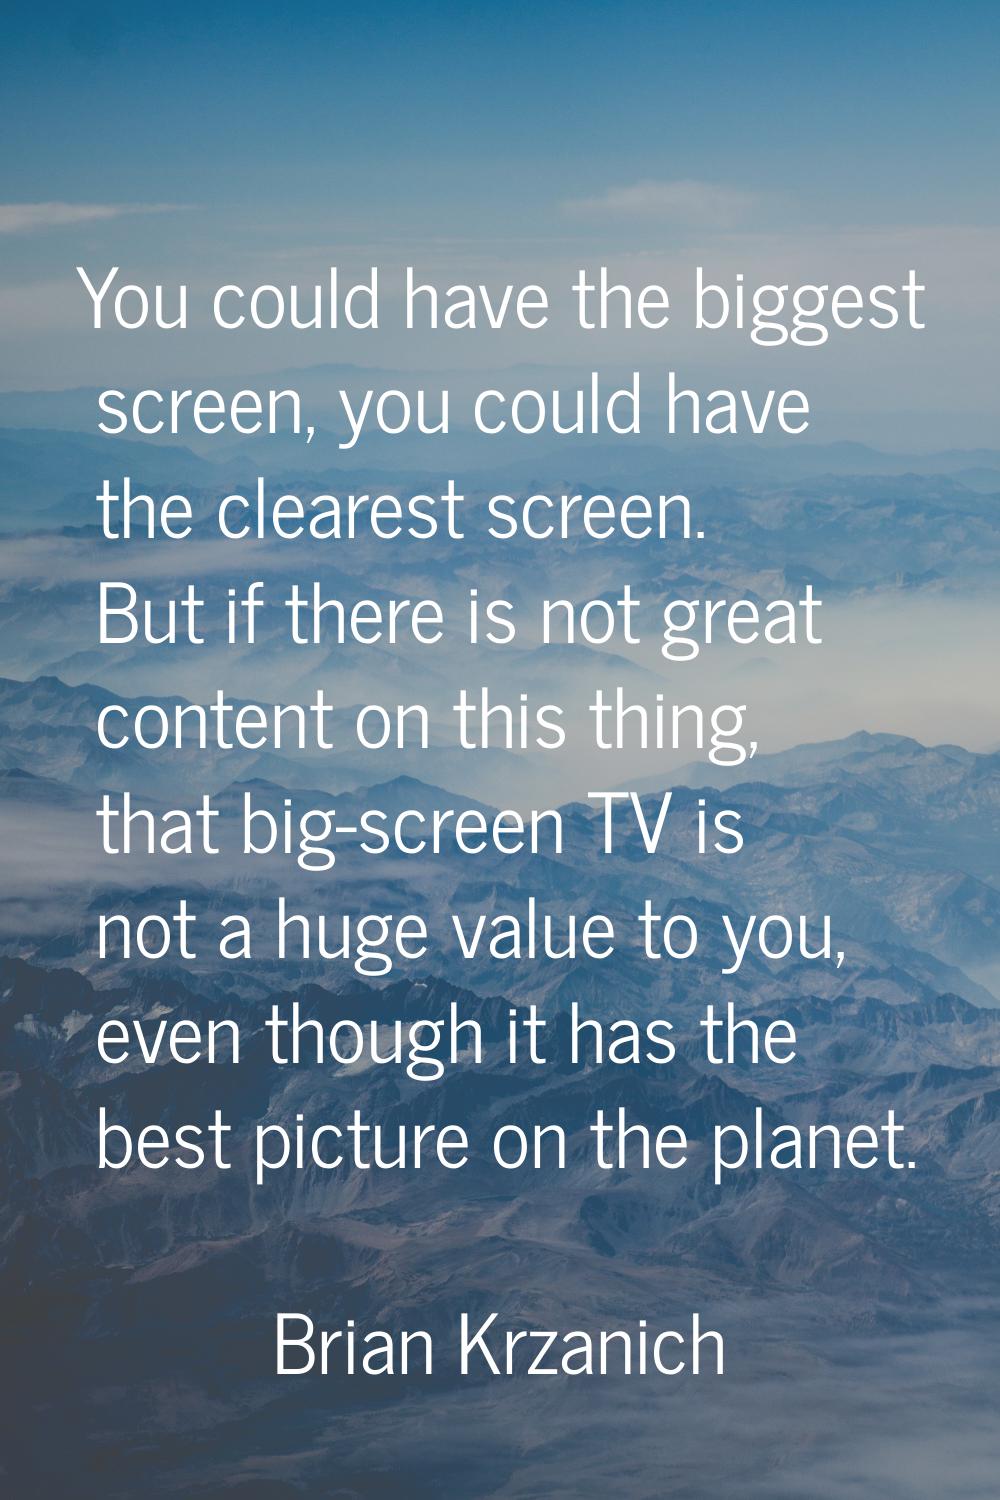 You could have the biggest screen, you could have the clearest screen. But if there is not great co